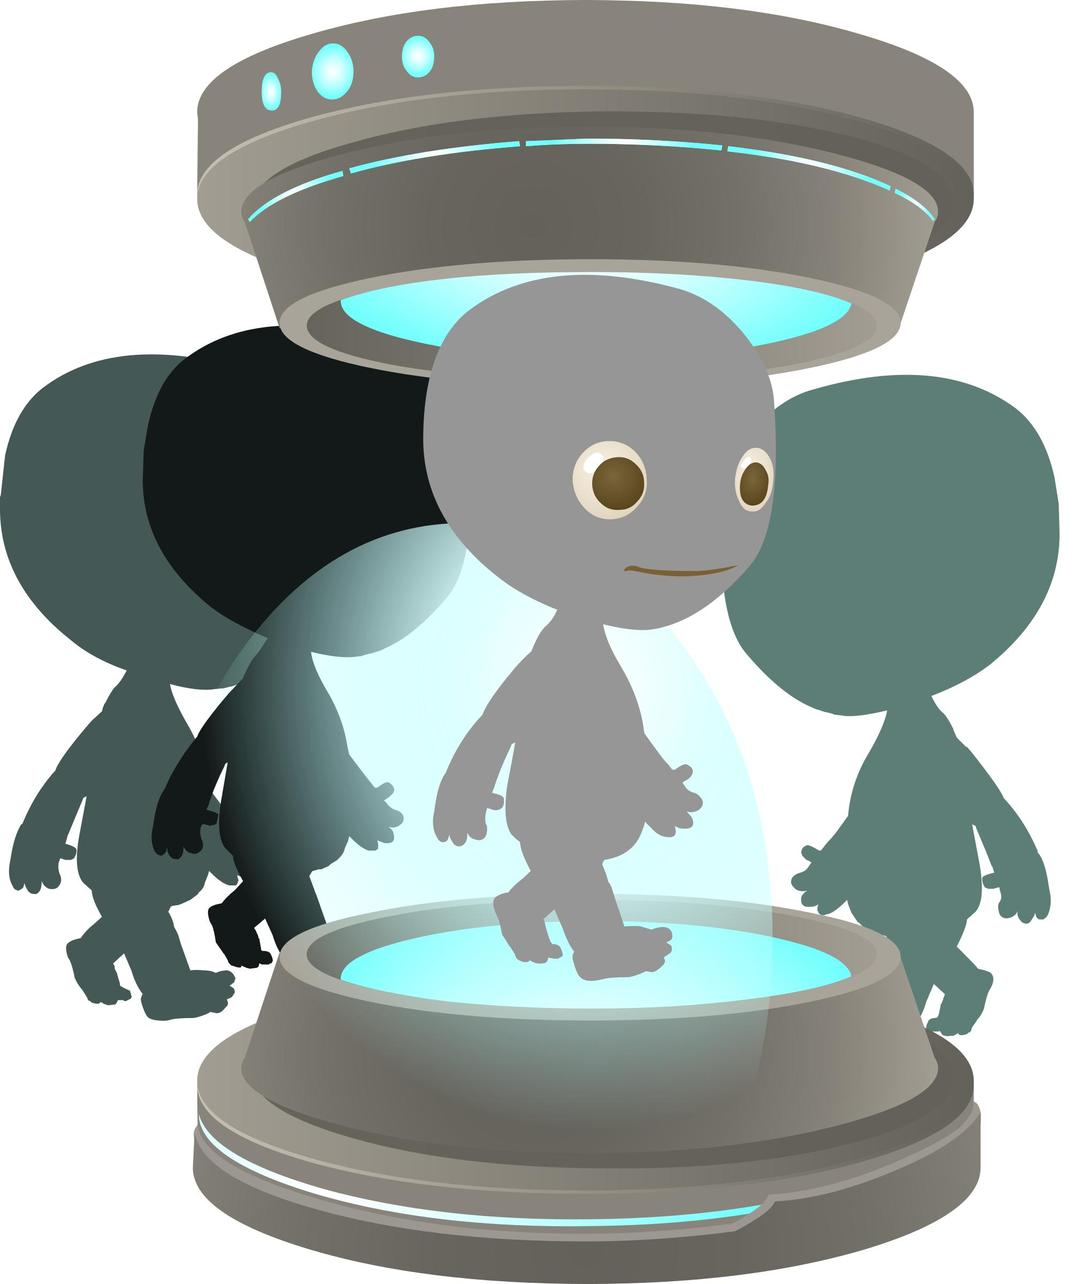 Quest Items Teleport With Followers png transparent